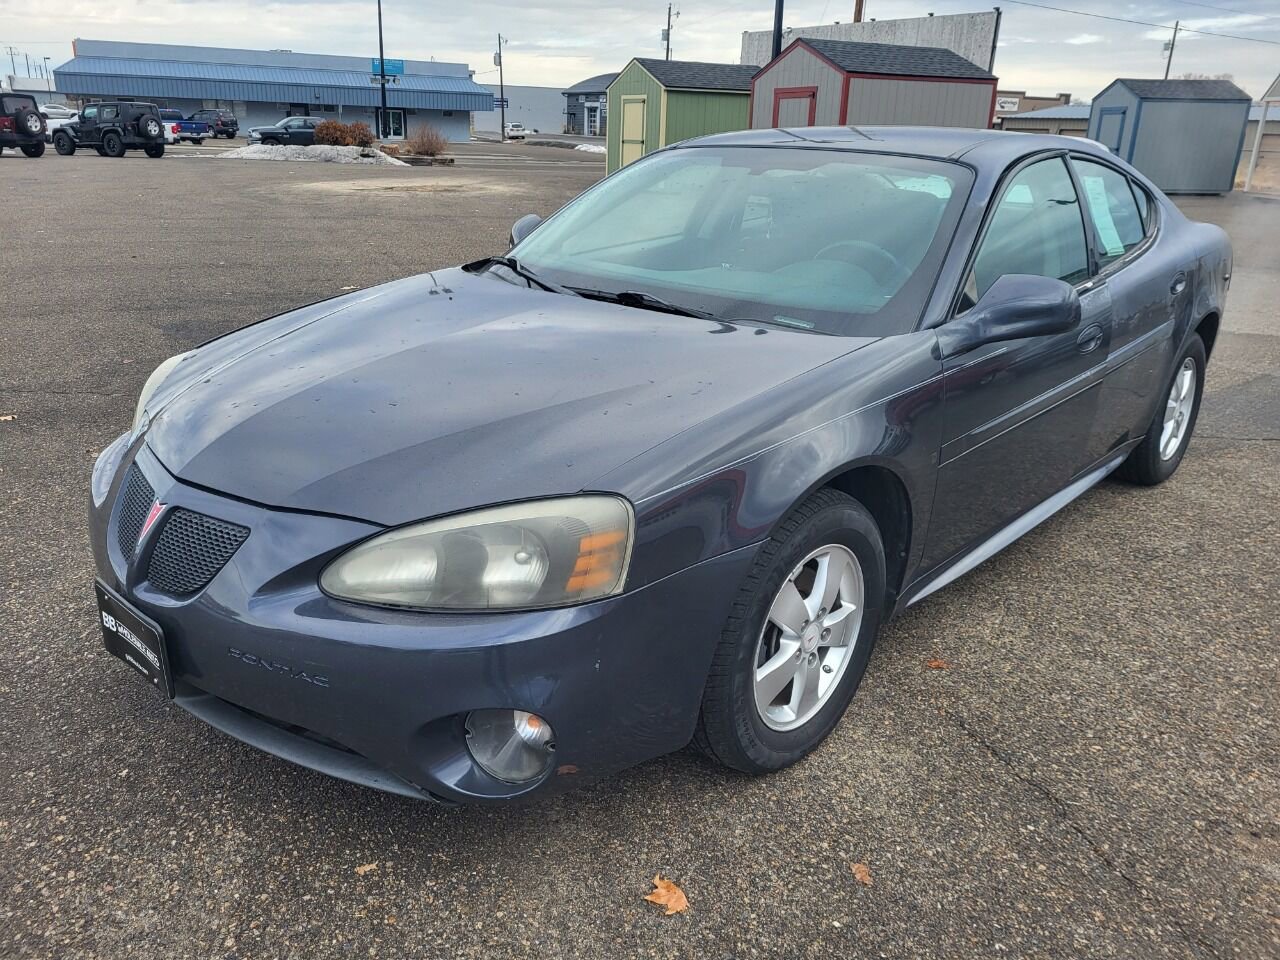 Used Pontiac Grand Prix for Sale Right Now - Autotrader